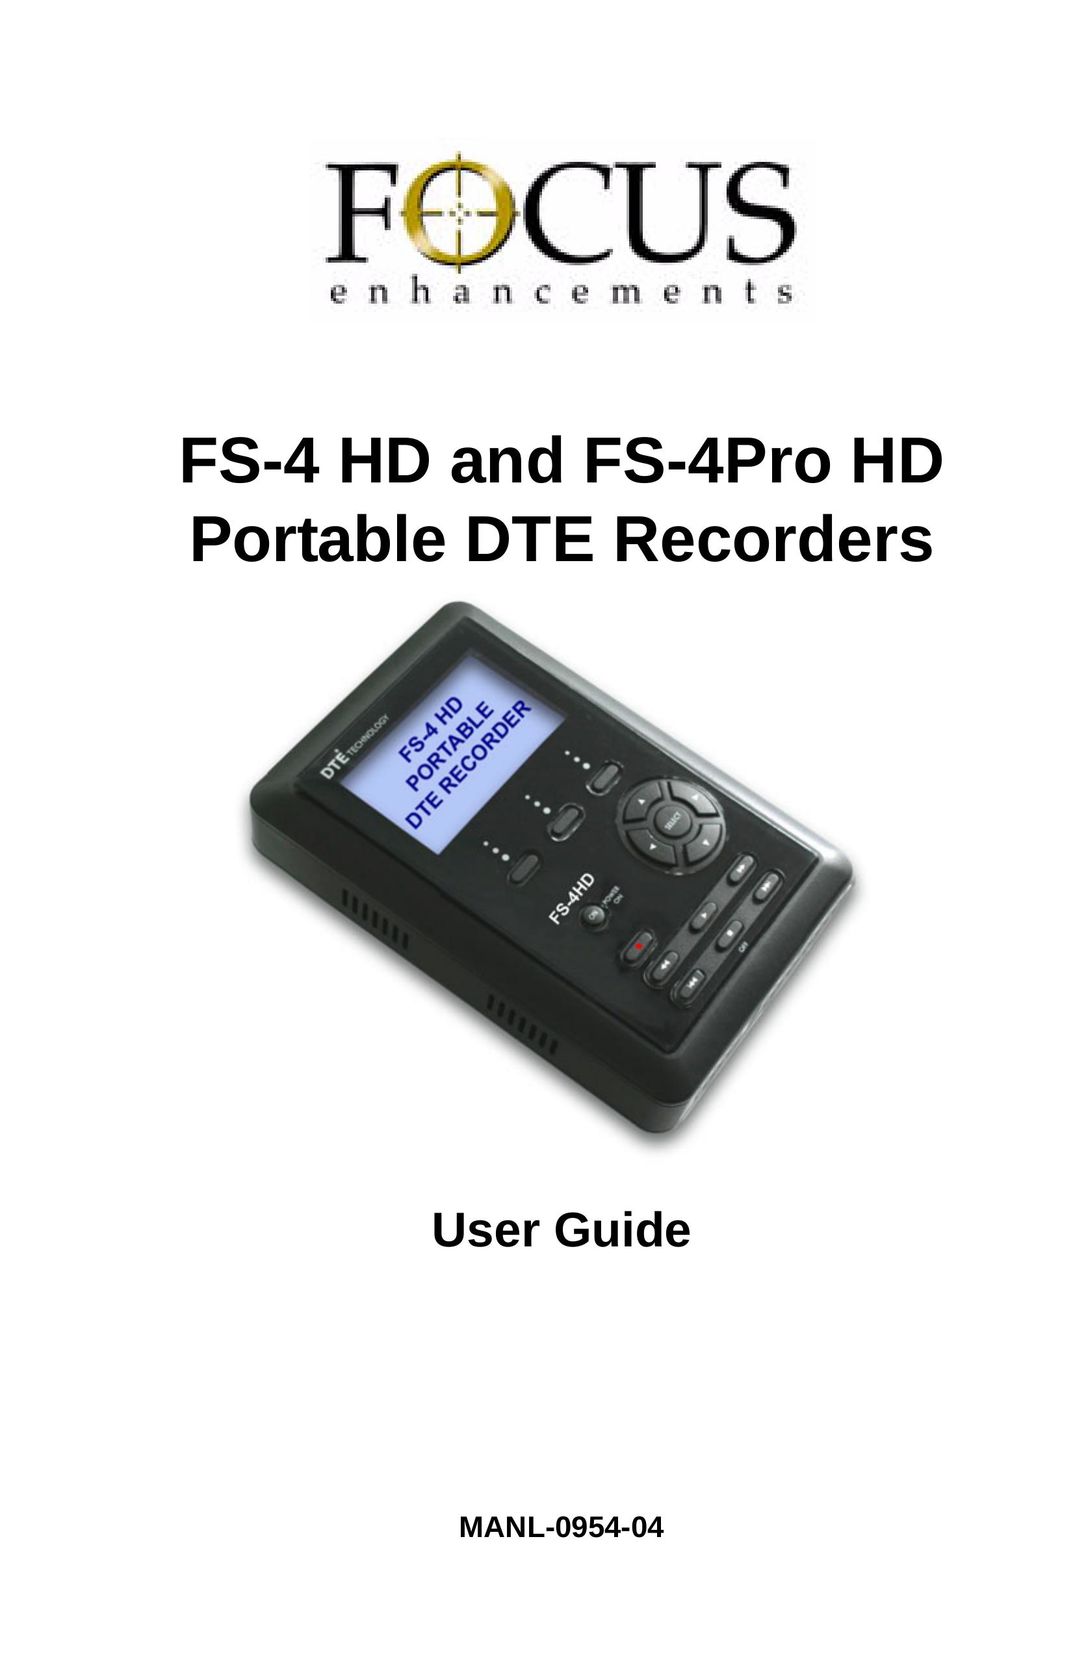 FOCUS Enhancements FS-4 Pro DVD Recorder User Manual (Page 1)